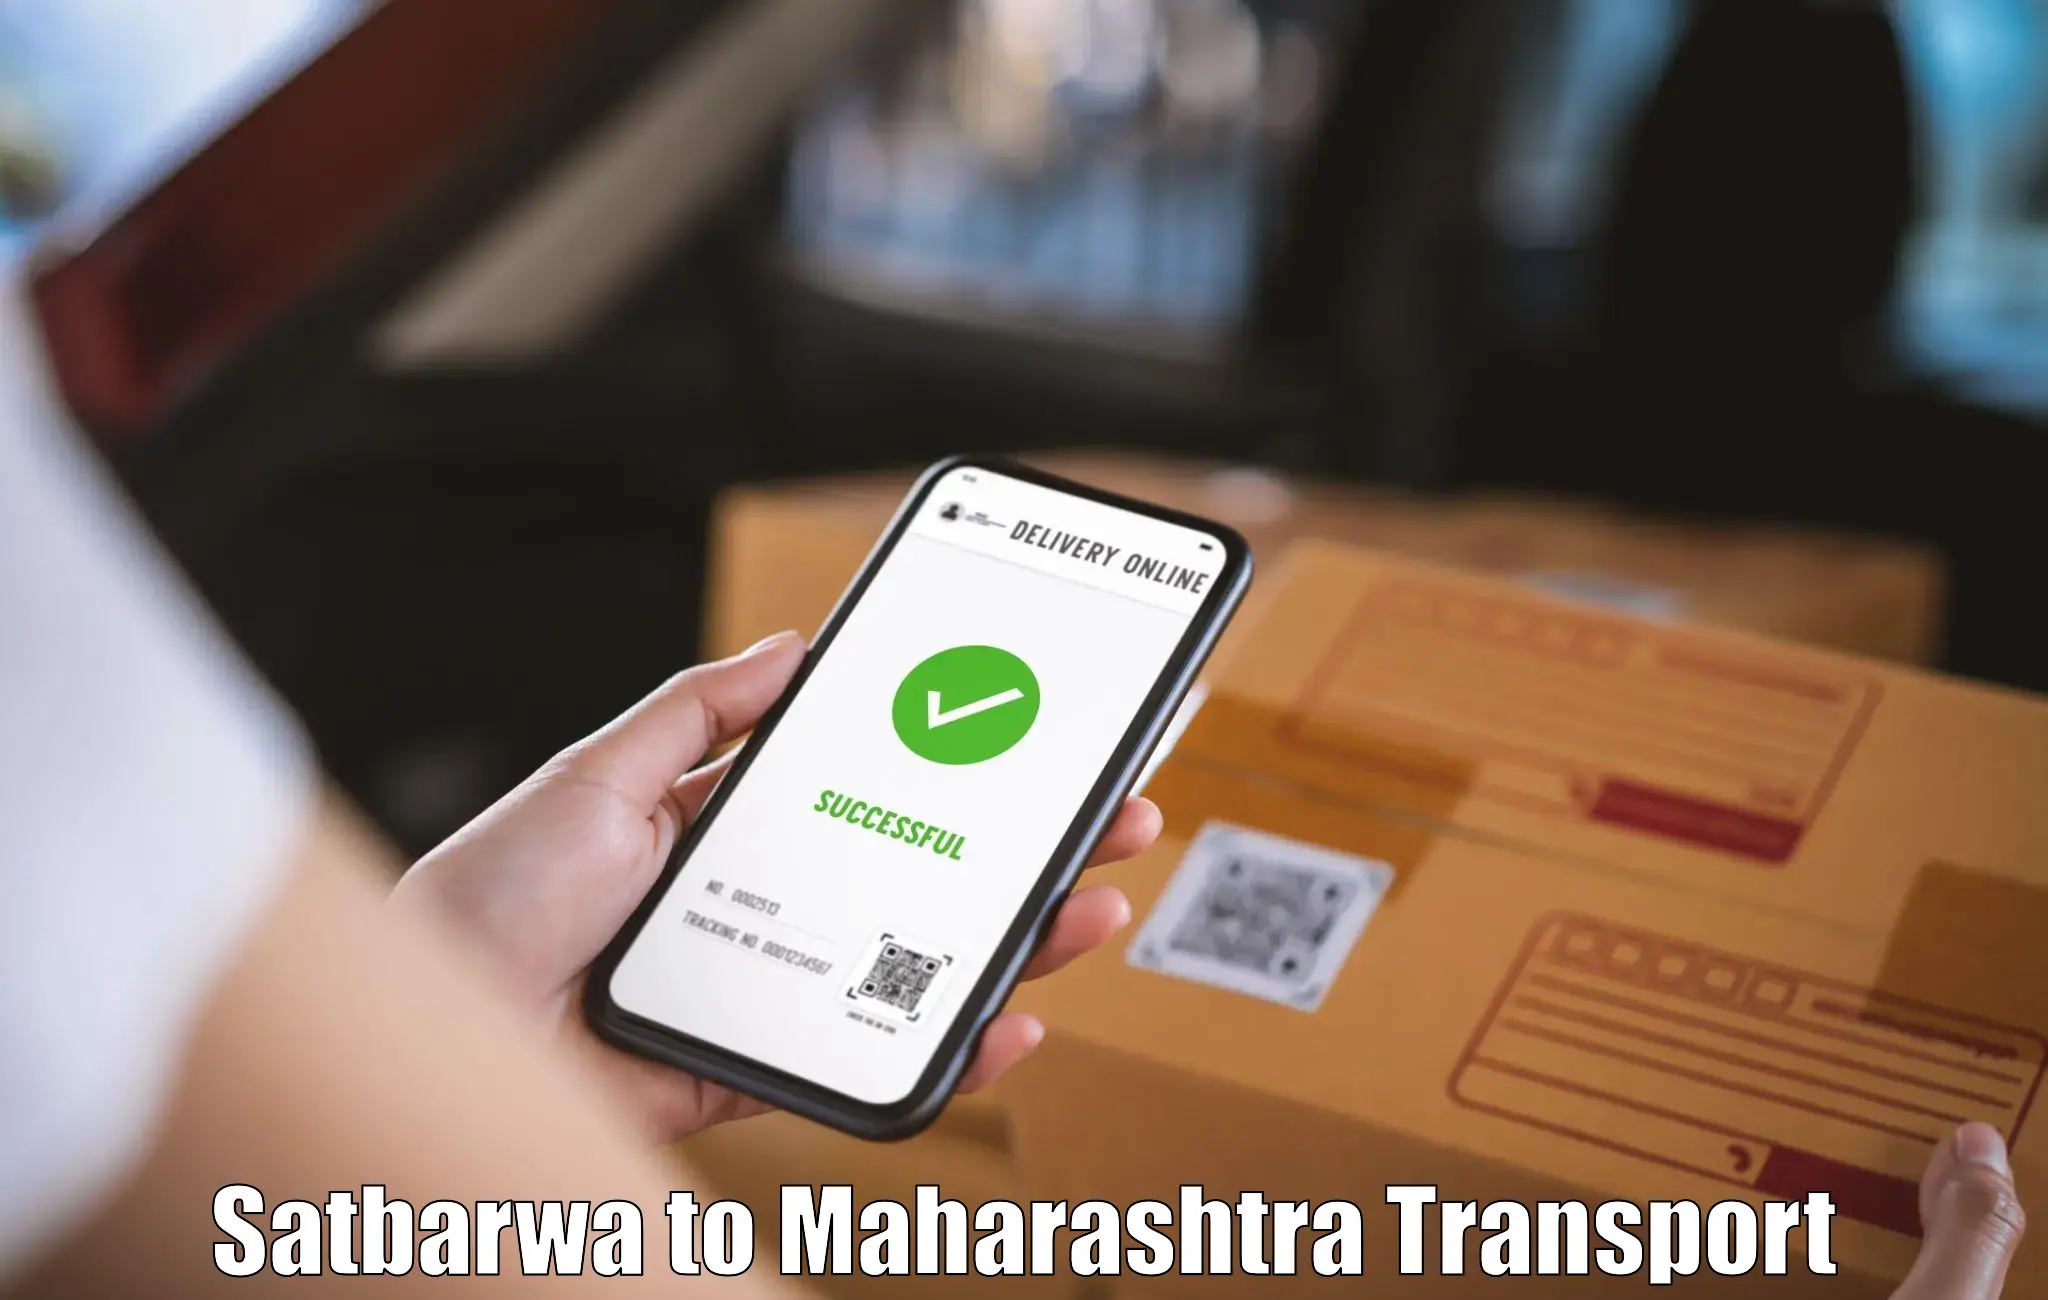 Transport services Satbarwa to Nanded